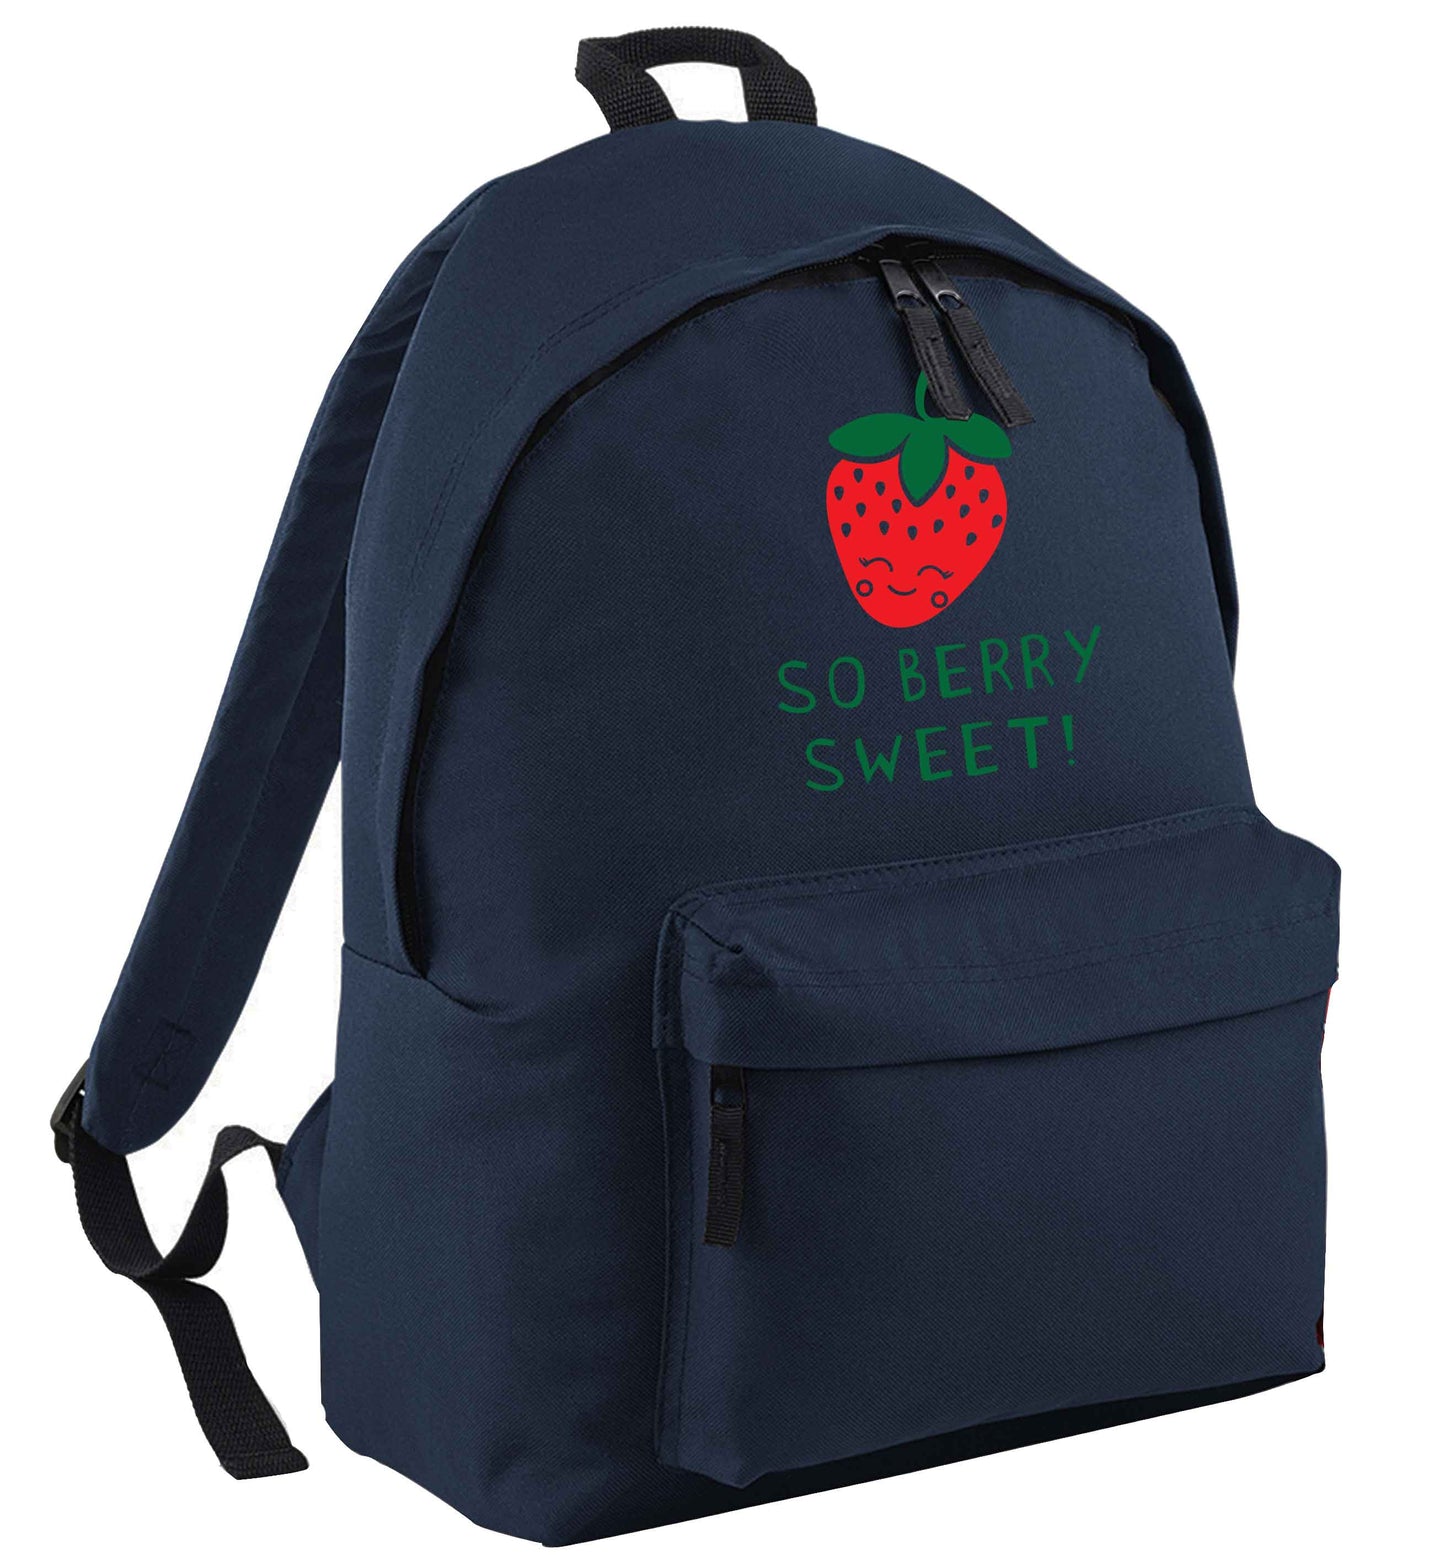 So berry sweet navy adults backpack